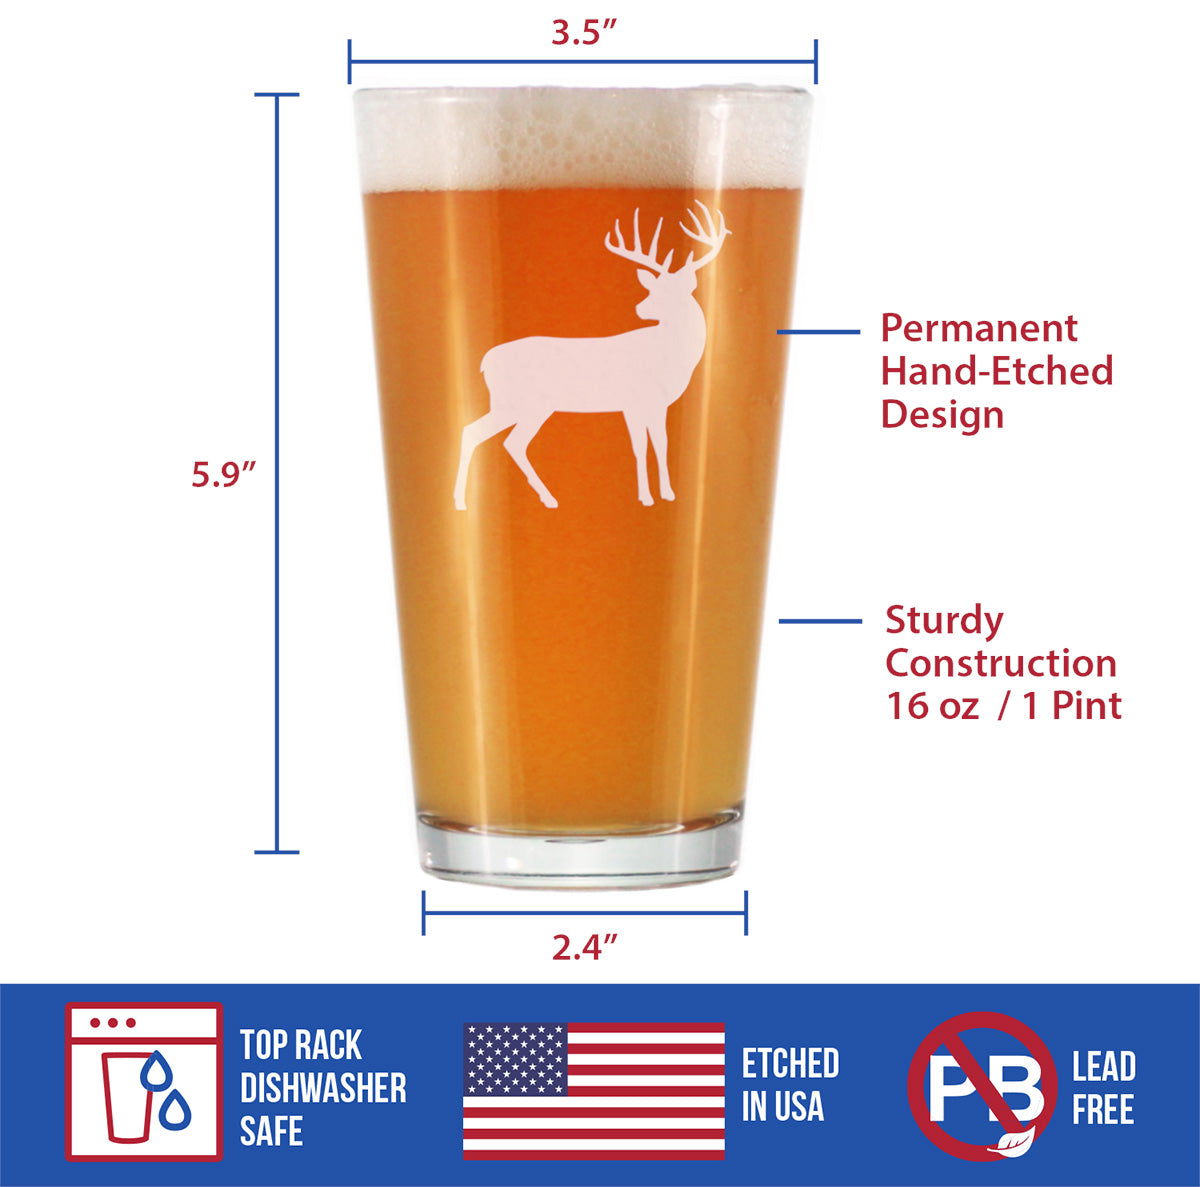 Deer Pint Glass for Beer - Cabin Themed Gifts or Rustic Decor for Men and Women - Fun Drinking or Party Glasses - 16 oz